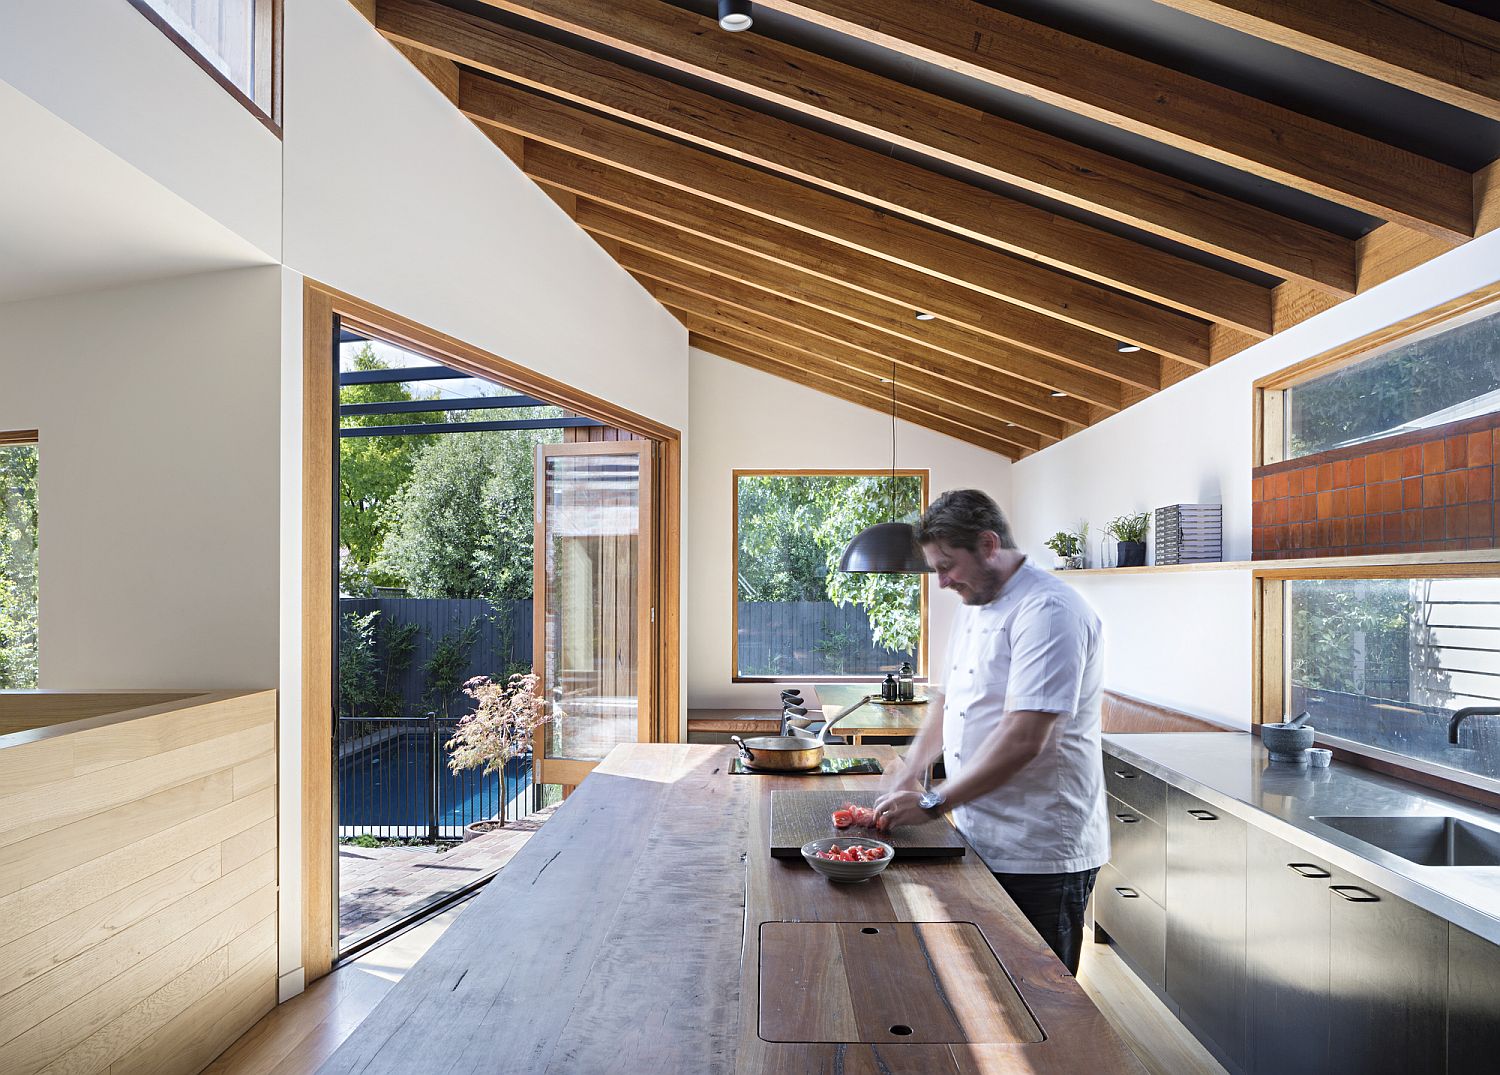 Designed for a Masterchef: Restored Victorian Weatherboard House